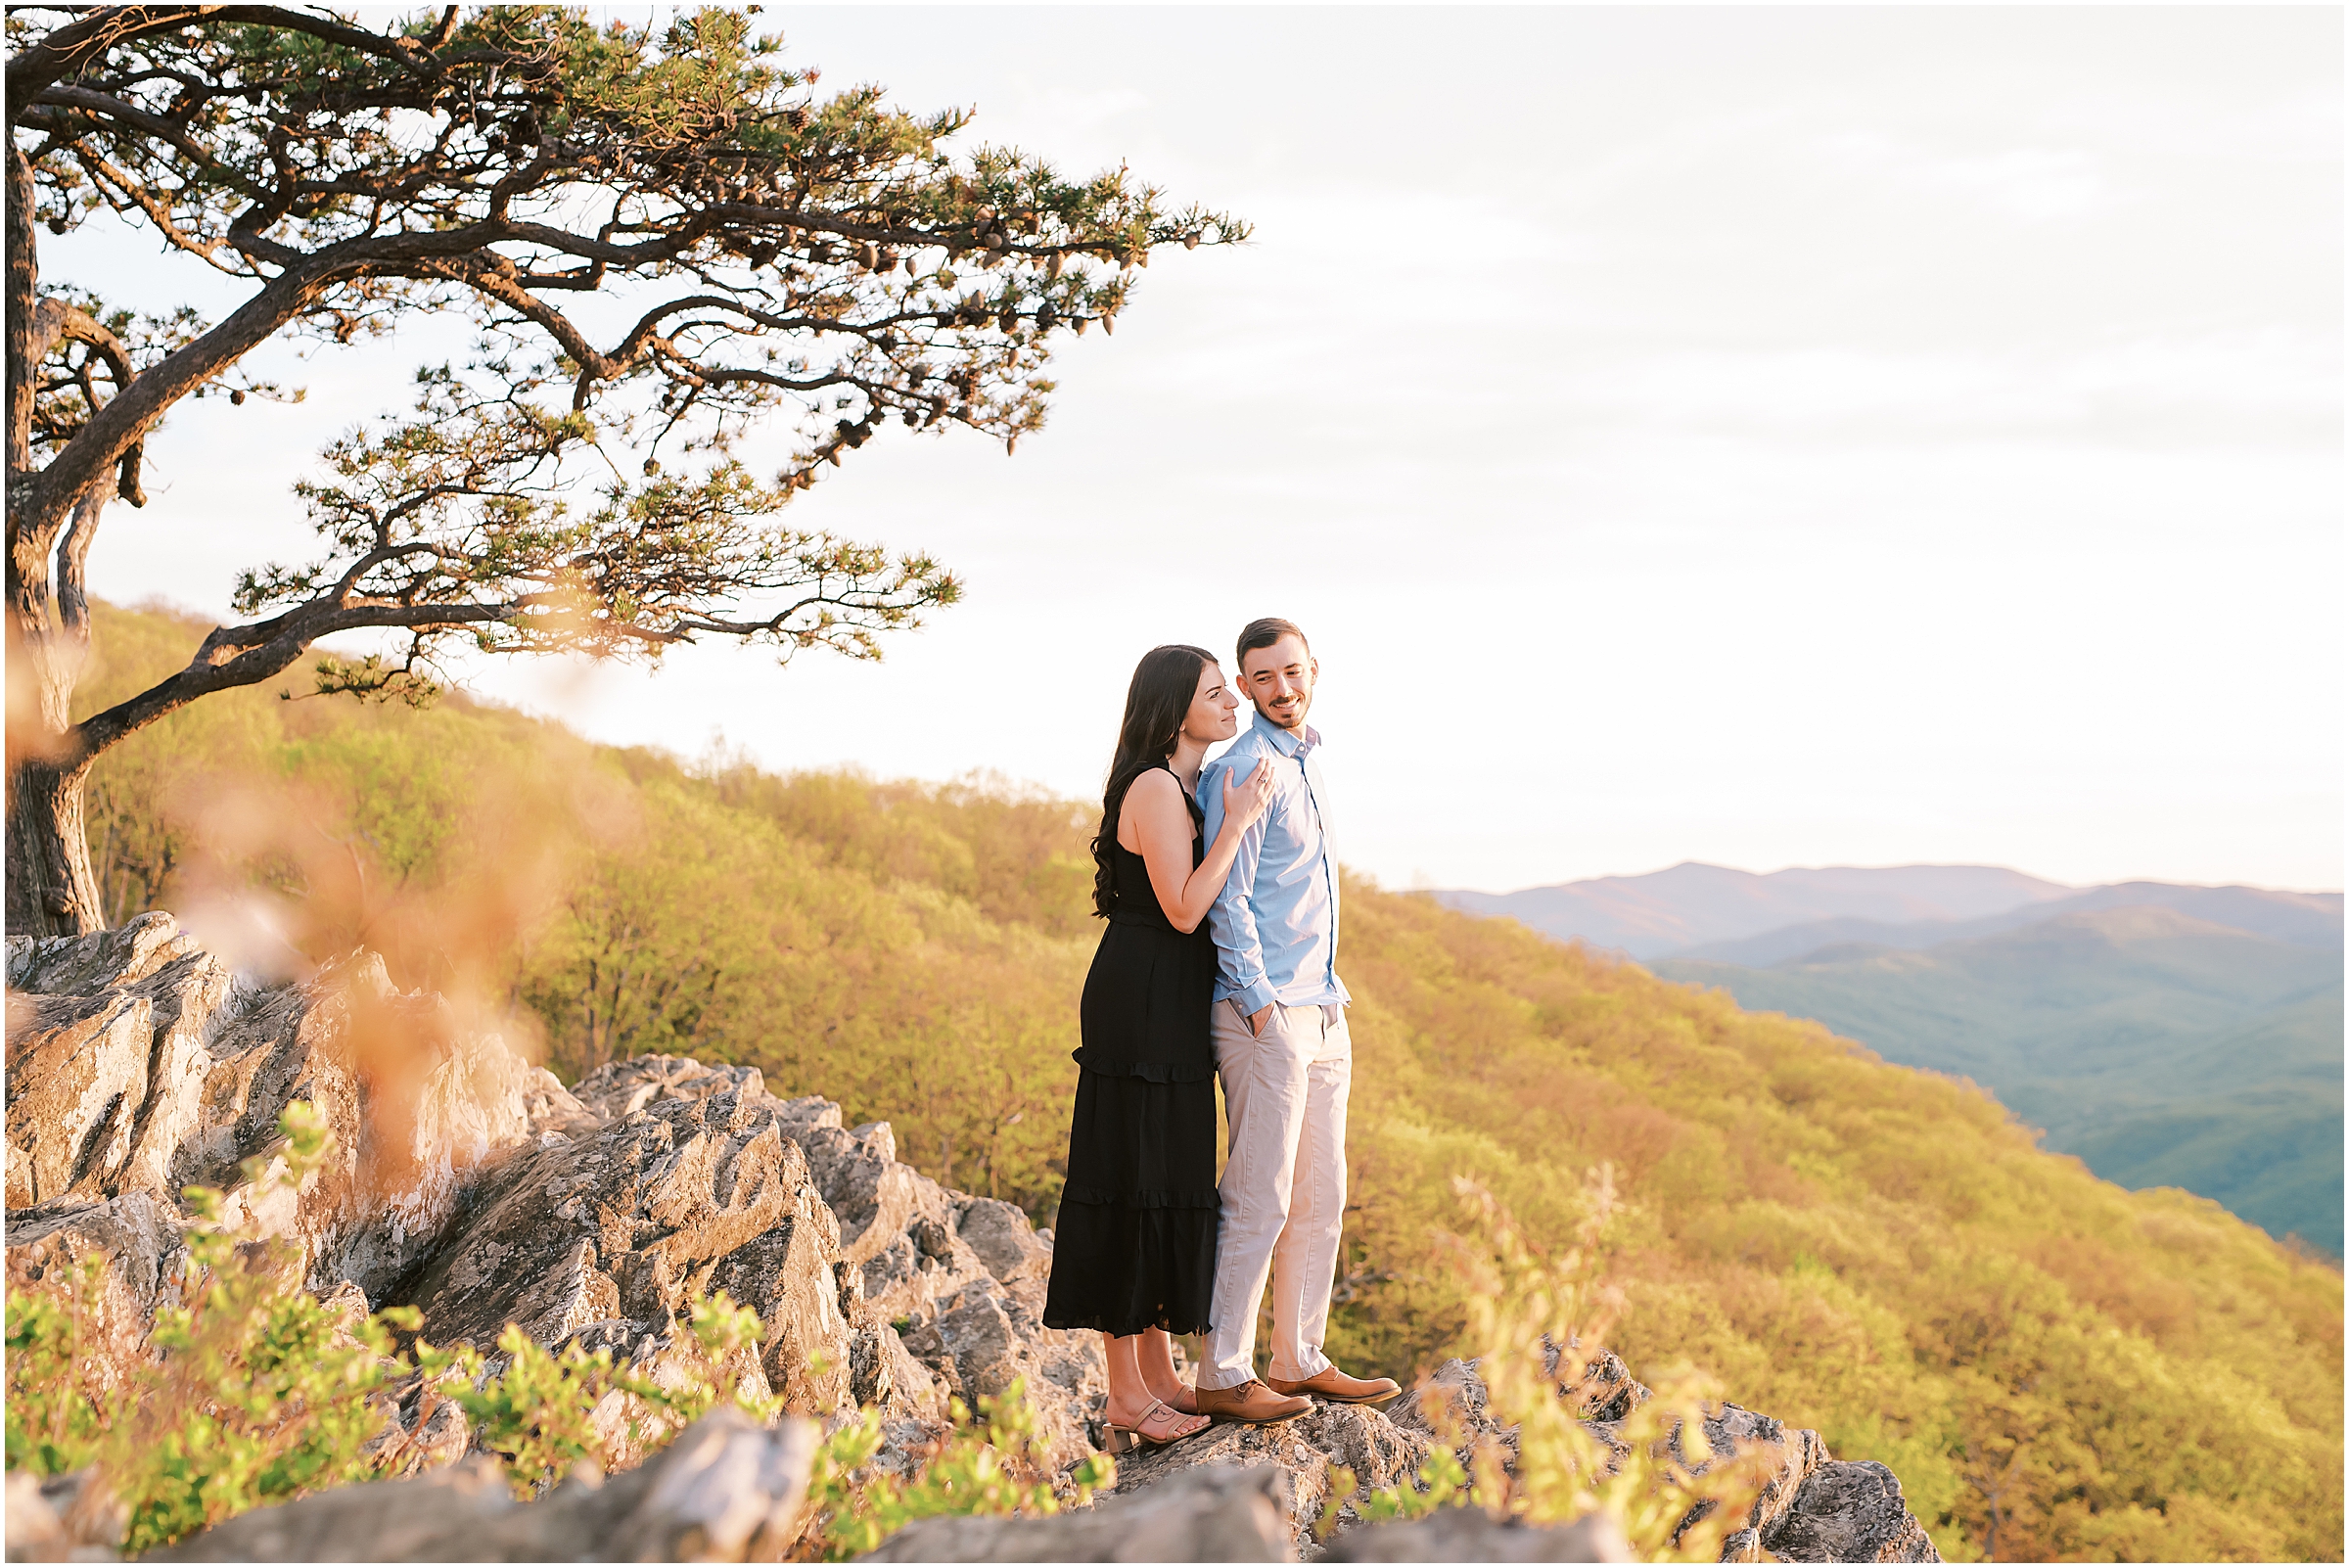 Couple at Ravens Roost Overlook during Engagement Session